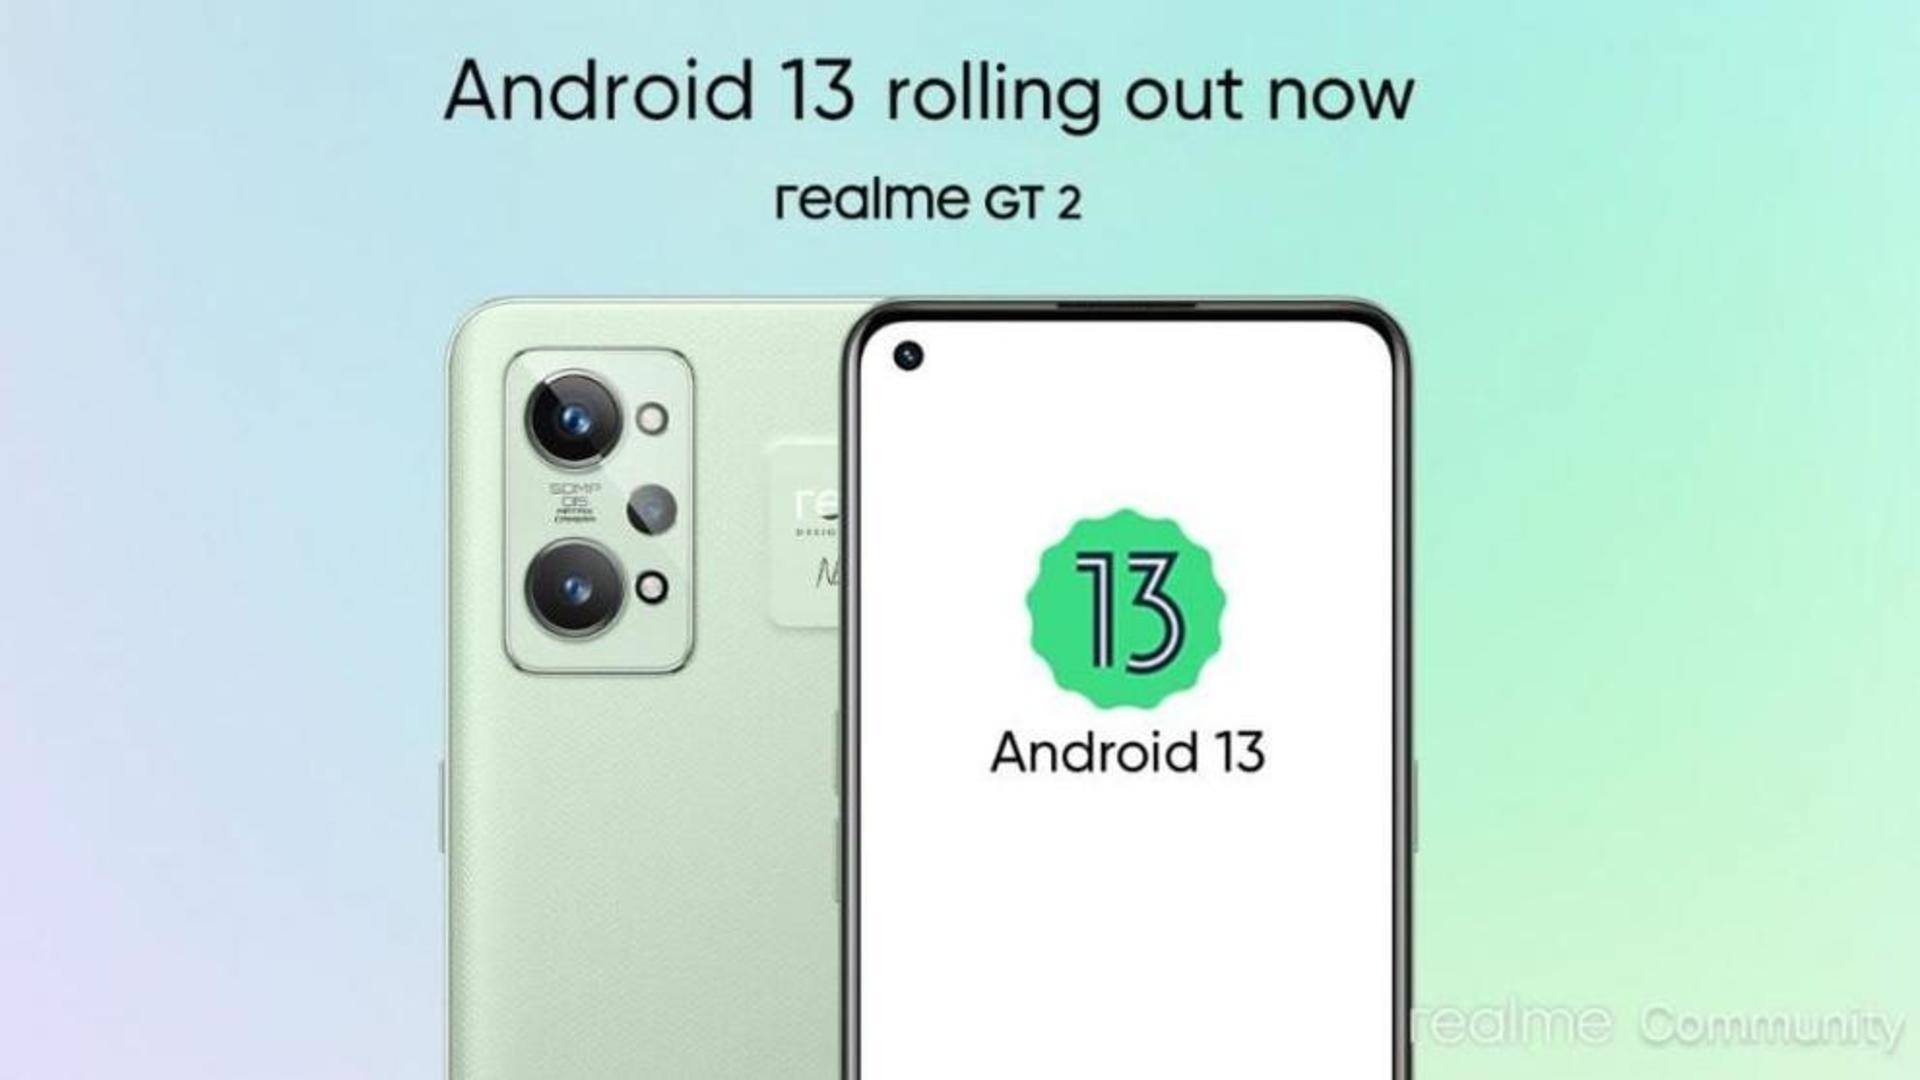 Realme GT 2 gets Android 13 update: How to update?